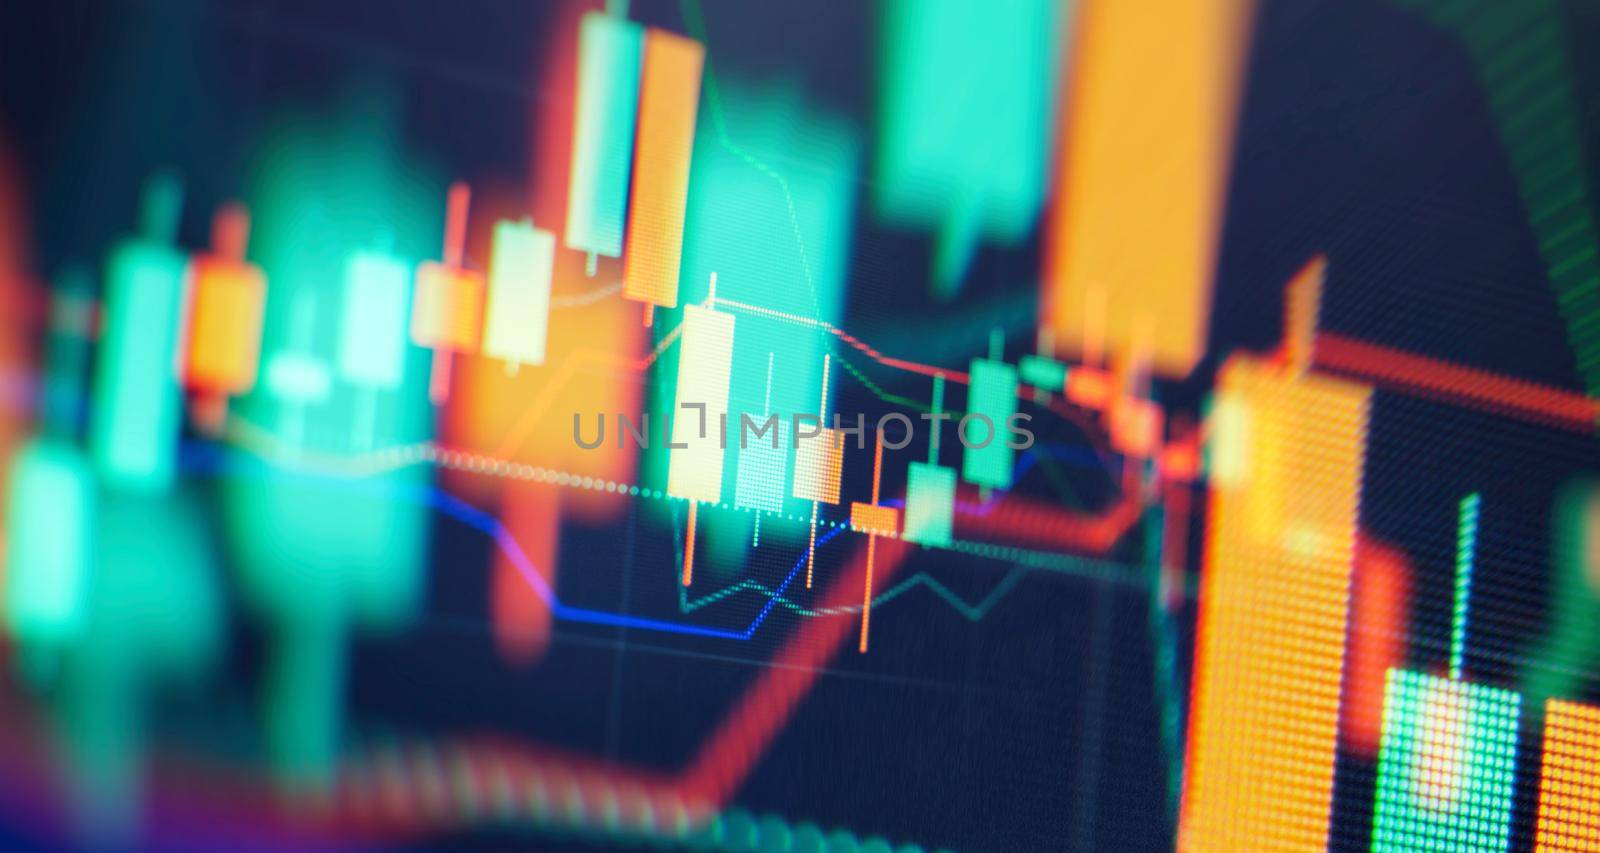 Stock or business market analysis concept.Economy trends background for business idea and all art work design. Abstract finance background.